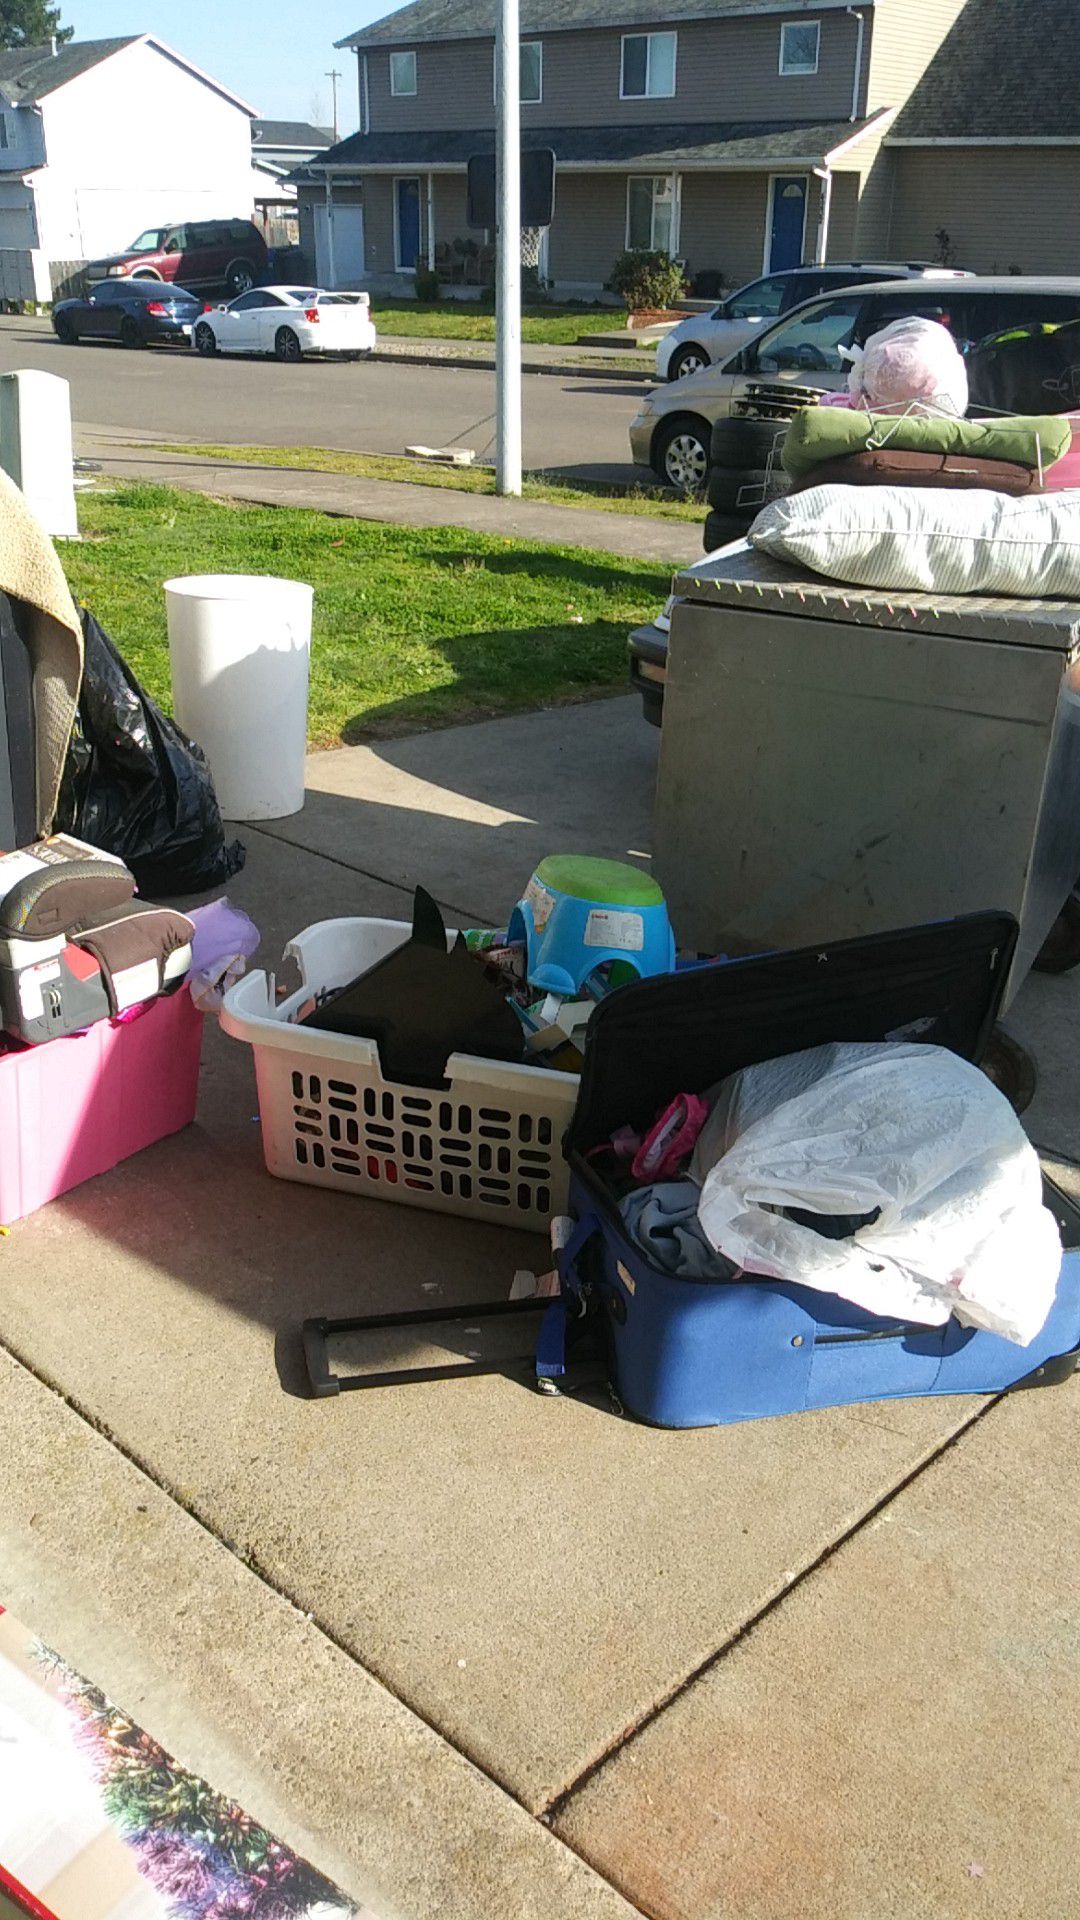 Free Baby 3-6mon.clothes tubs,kids clothes and toys, miscellaneous stuff take all 3170 Tierra Dr NE Salem ,Or